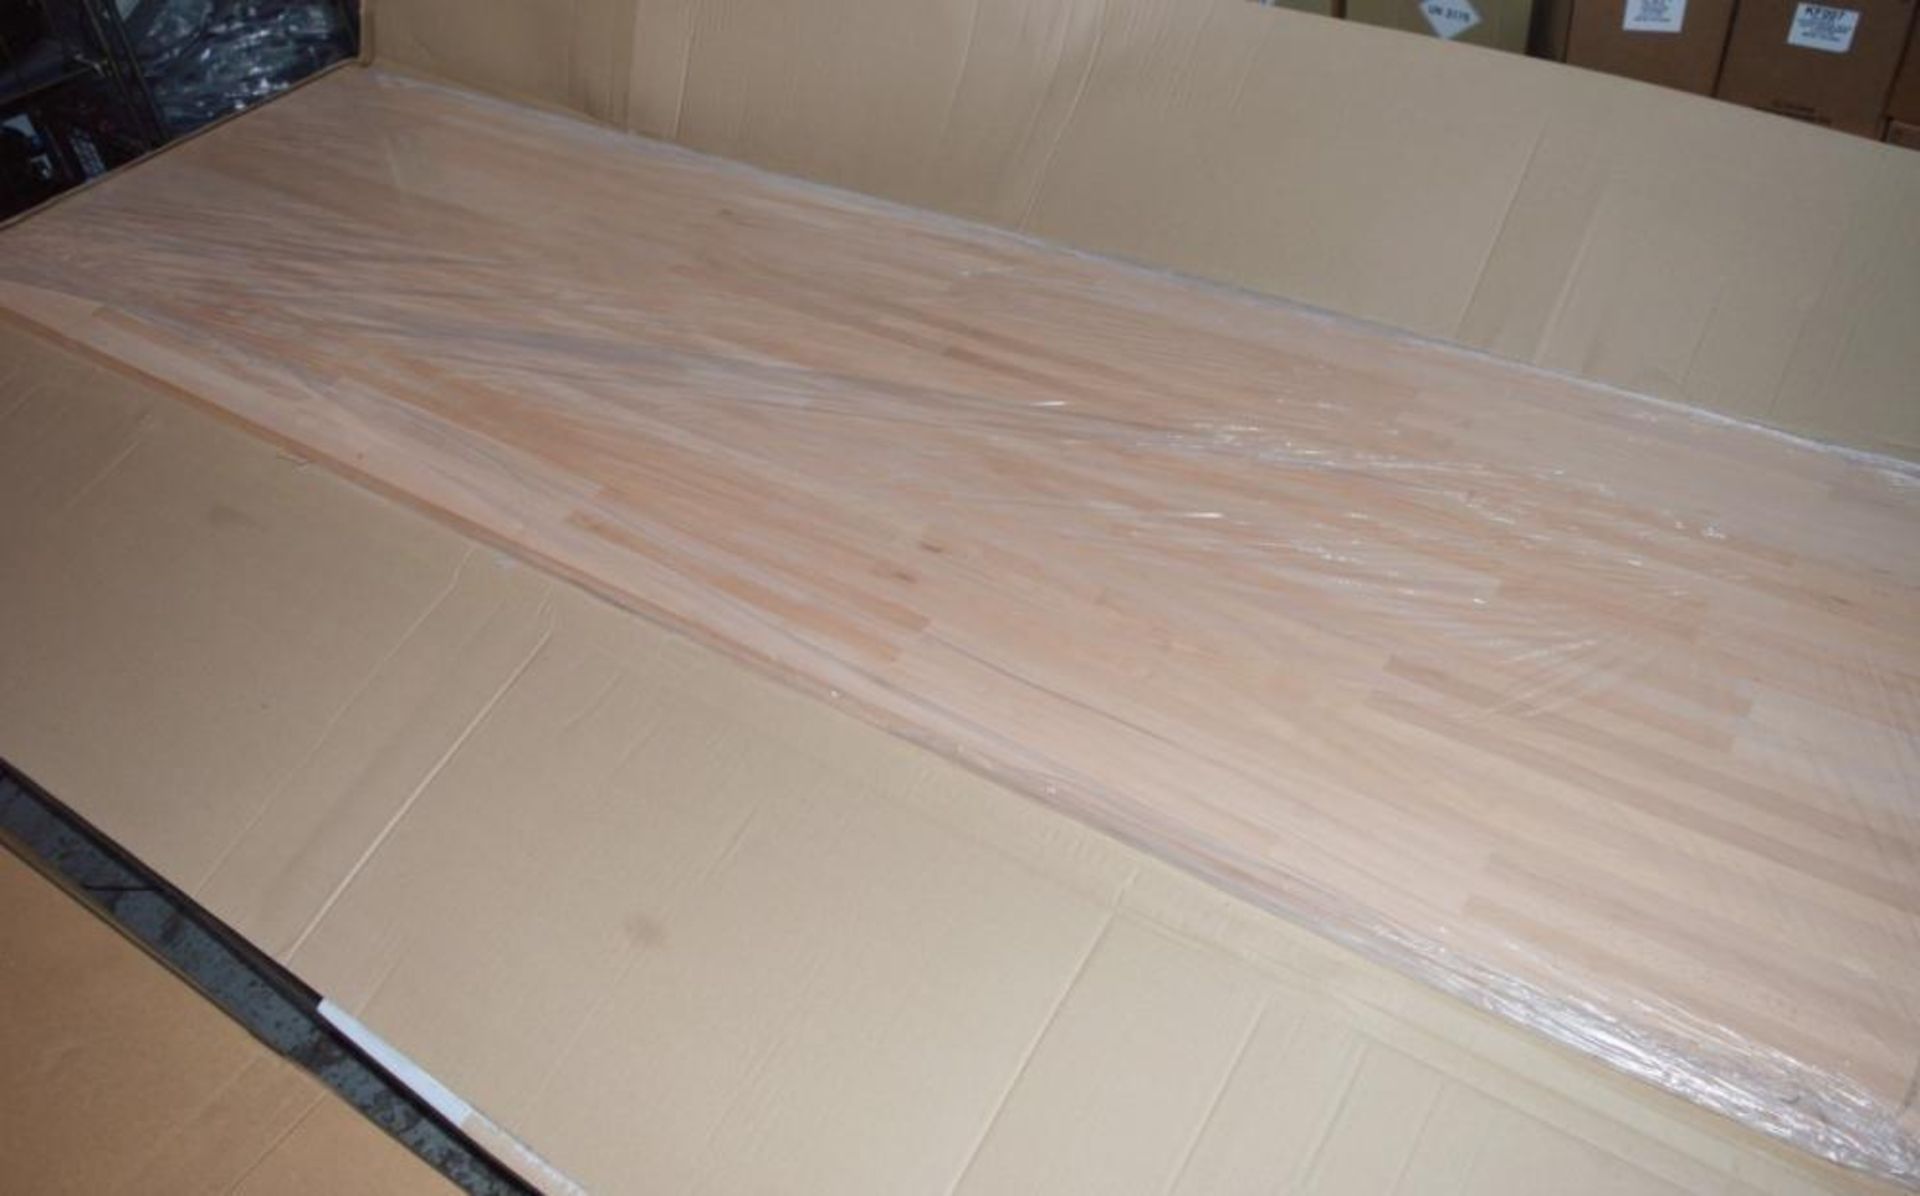 4 x Solid Wood Kitchen Worktops - PRIME BEECH - First Grade Finger Jointed Kitchen Worktop - Size: 3 - Image 2 of 5